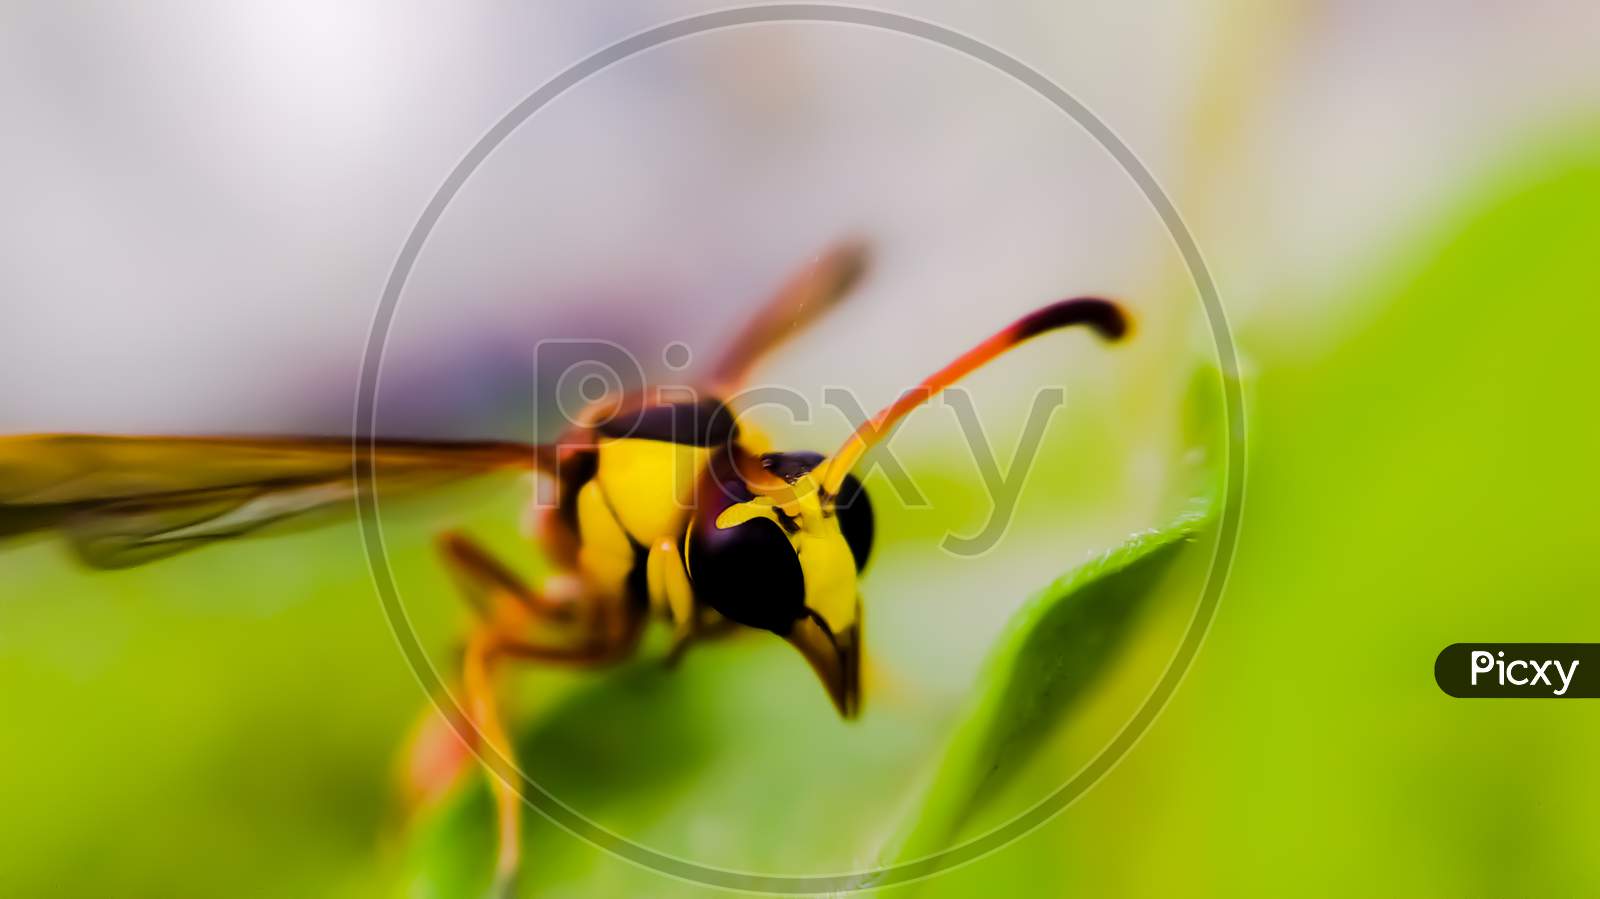 Vespa on leaf garden hornet insect vespa fly yellow bee yellow hornet